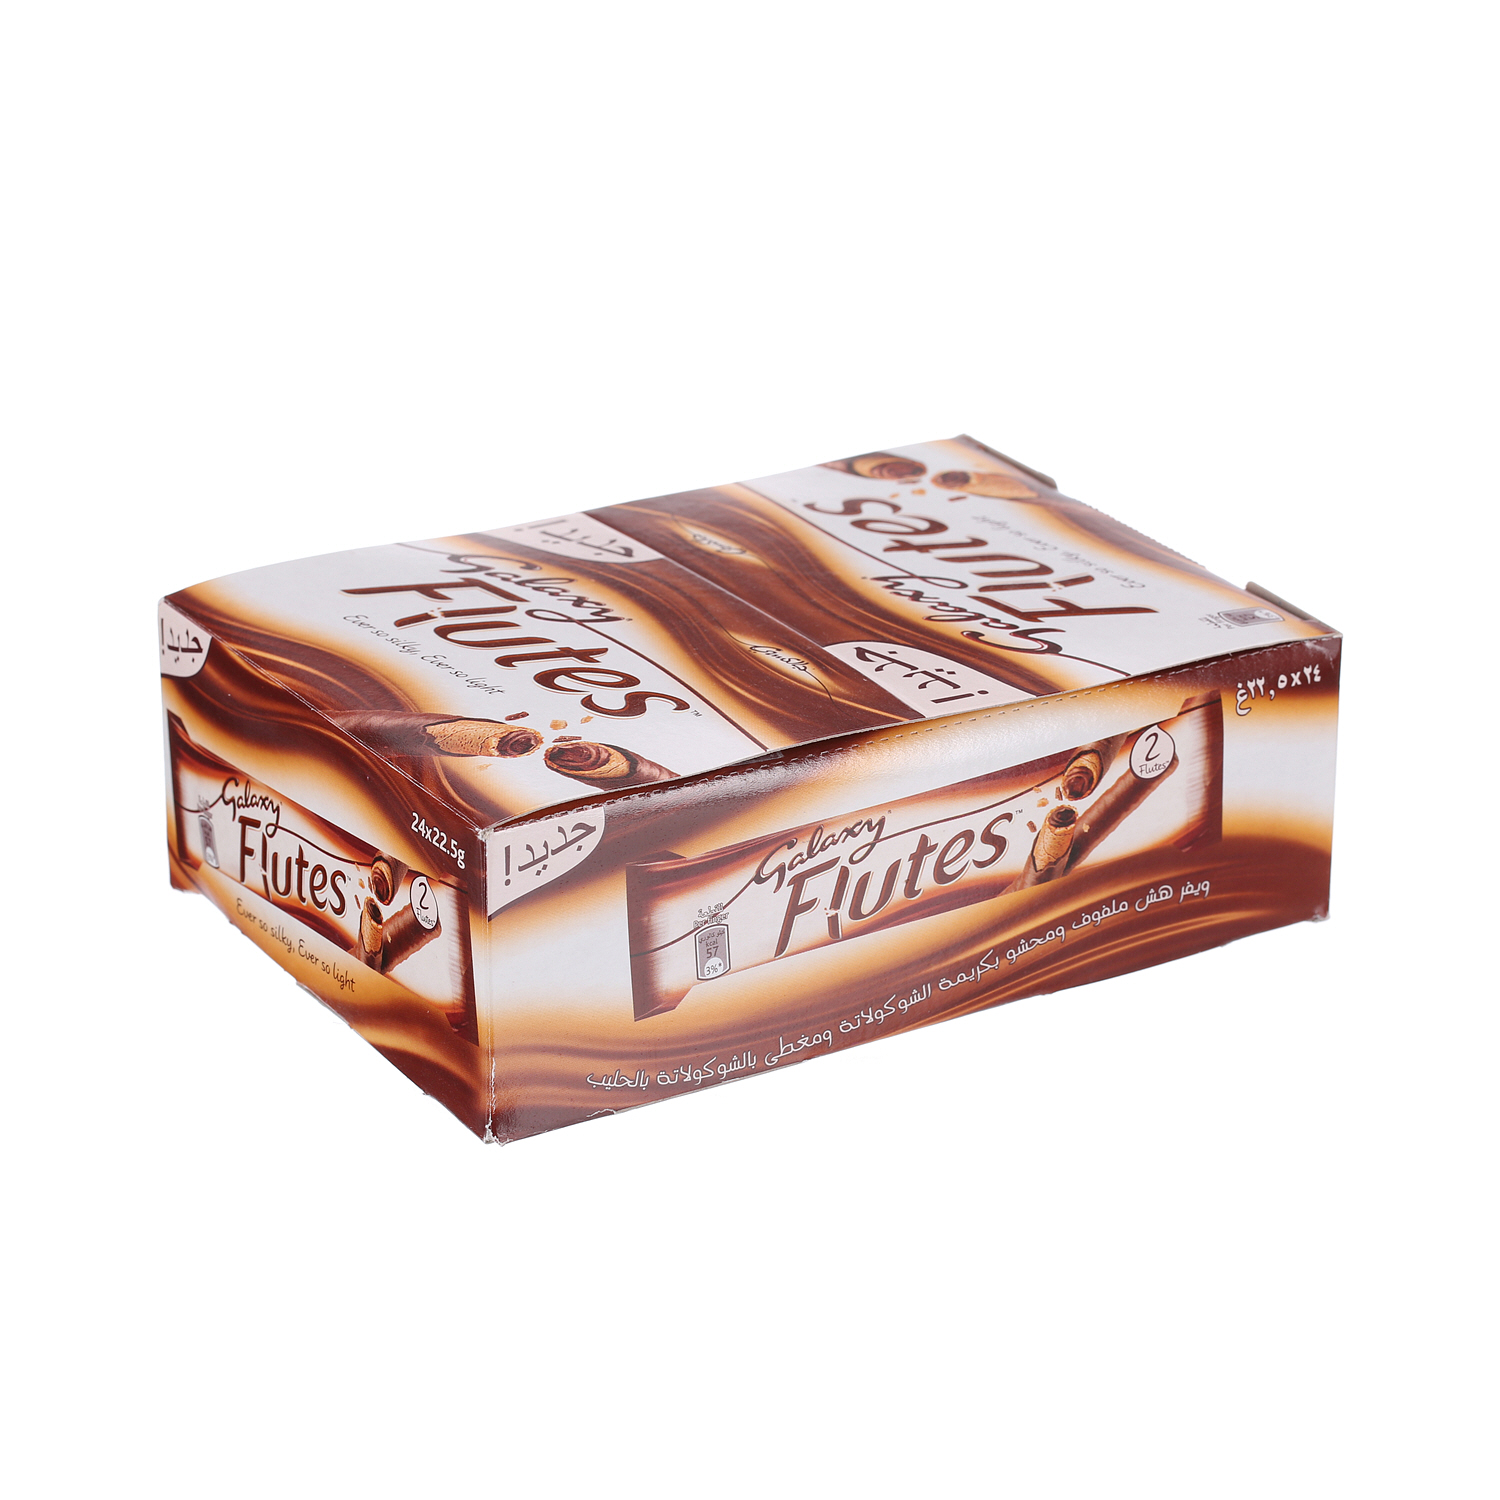 Galaxy Flutes Chocolate Twin Finger 22.5 g × 24 Pack